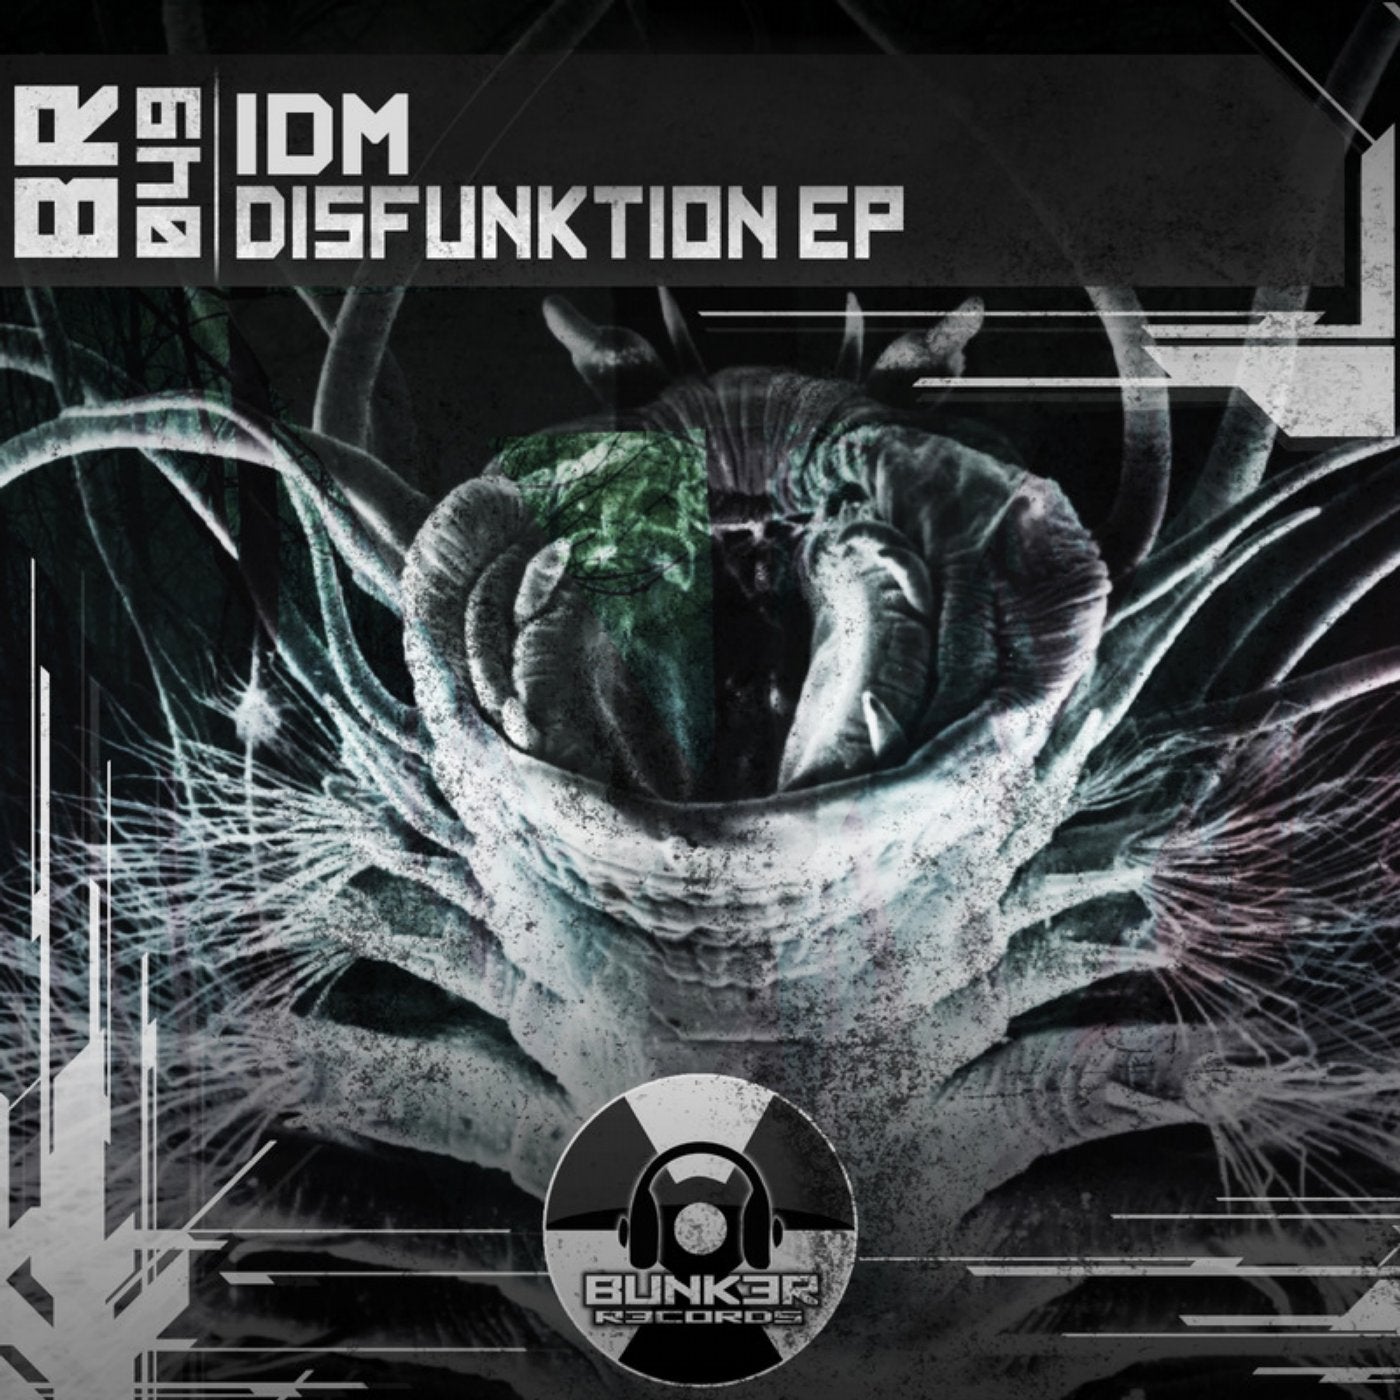 Disfunktion EP